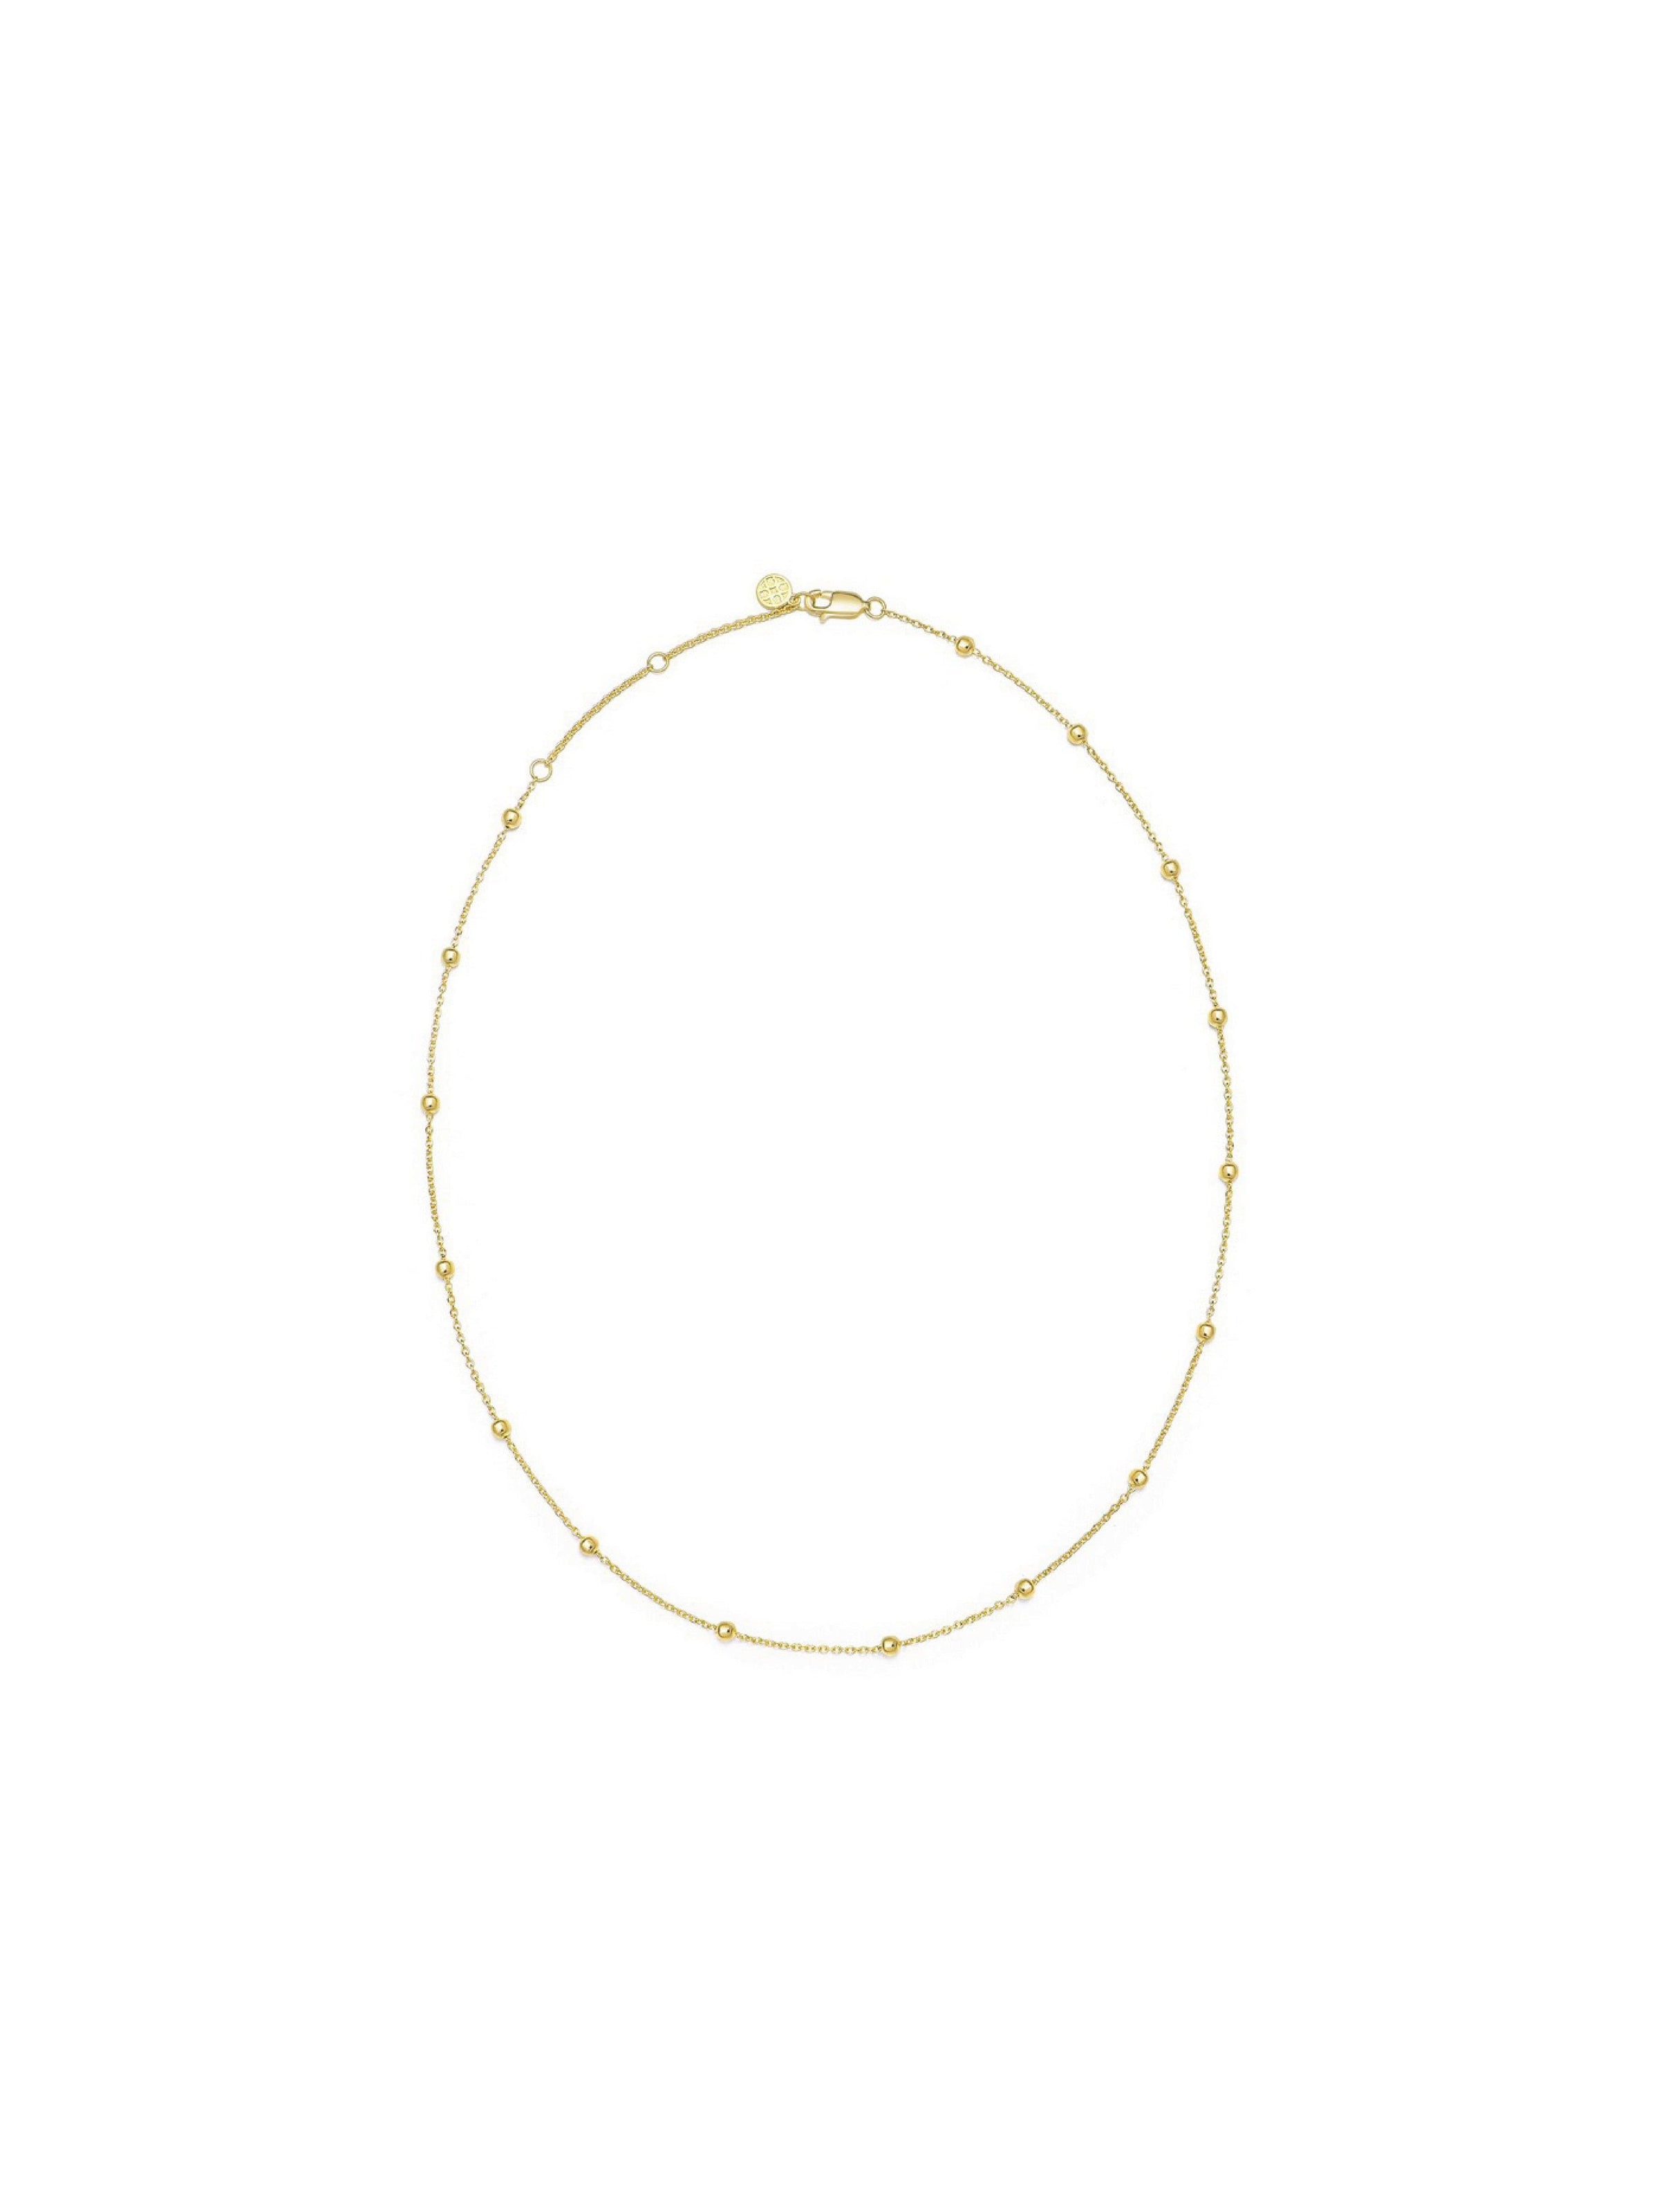 Blissful Time Necklace- Oval Link